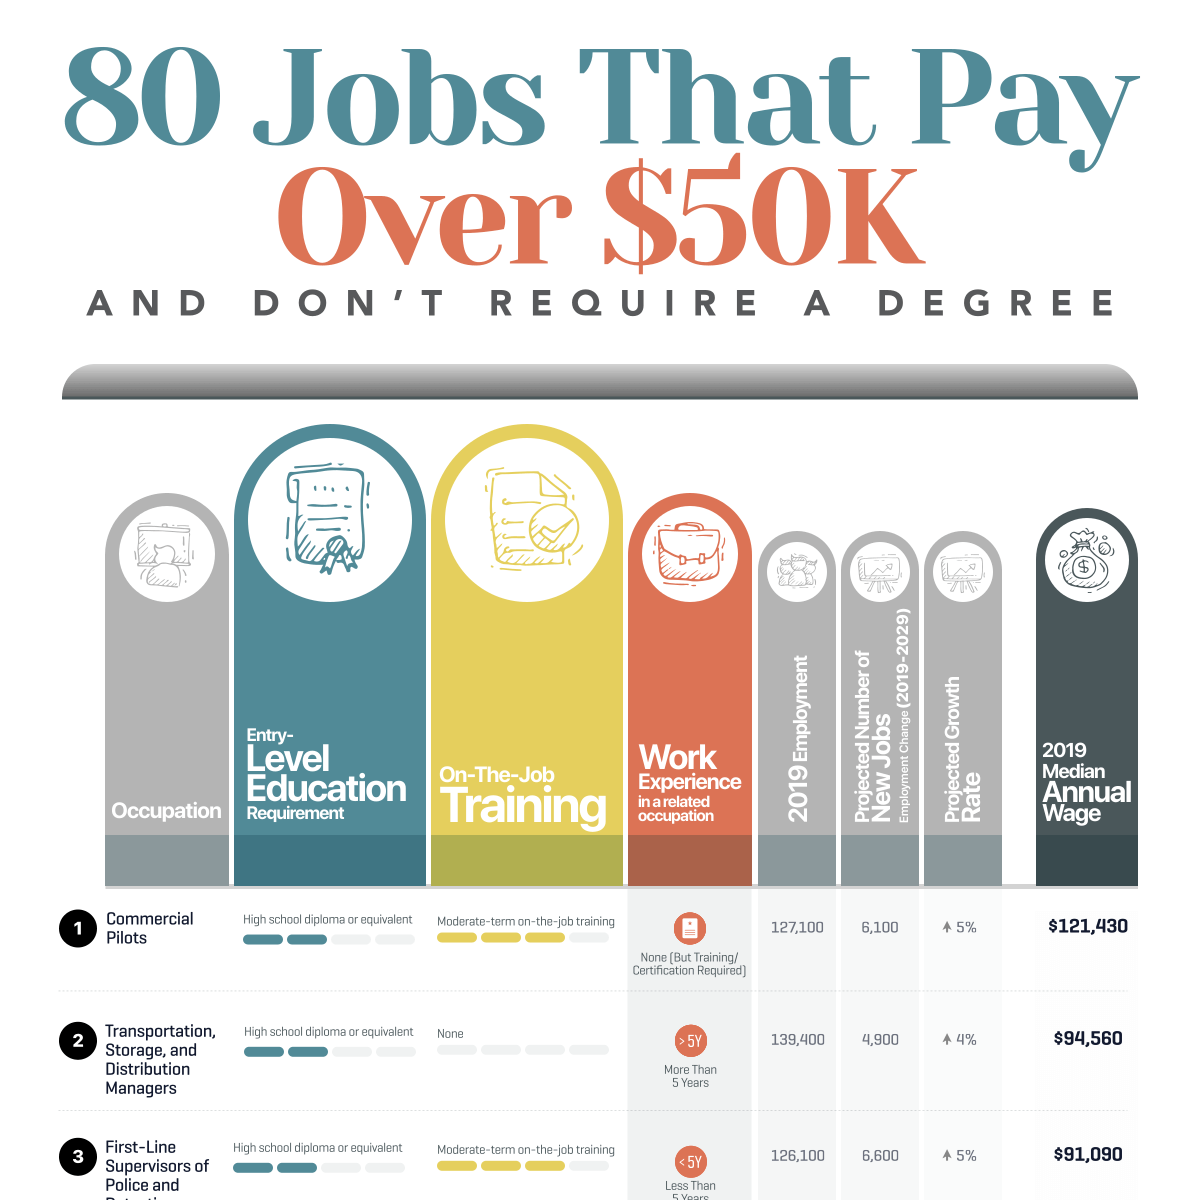 80 Jobs That Pay Over 50k And Dont Require A Degree Us Career